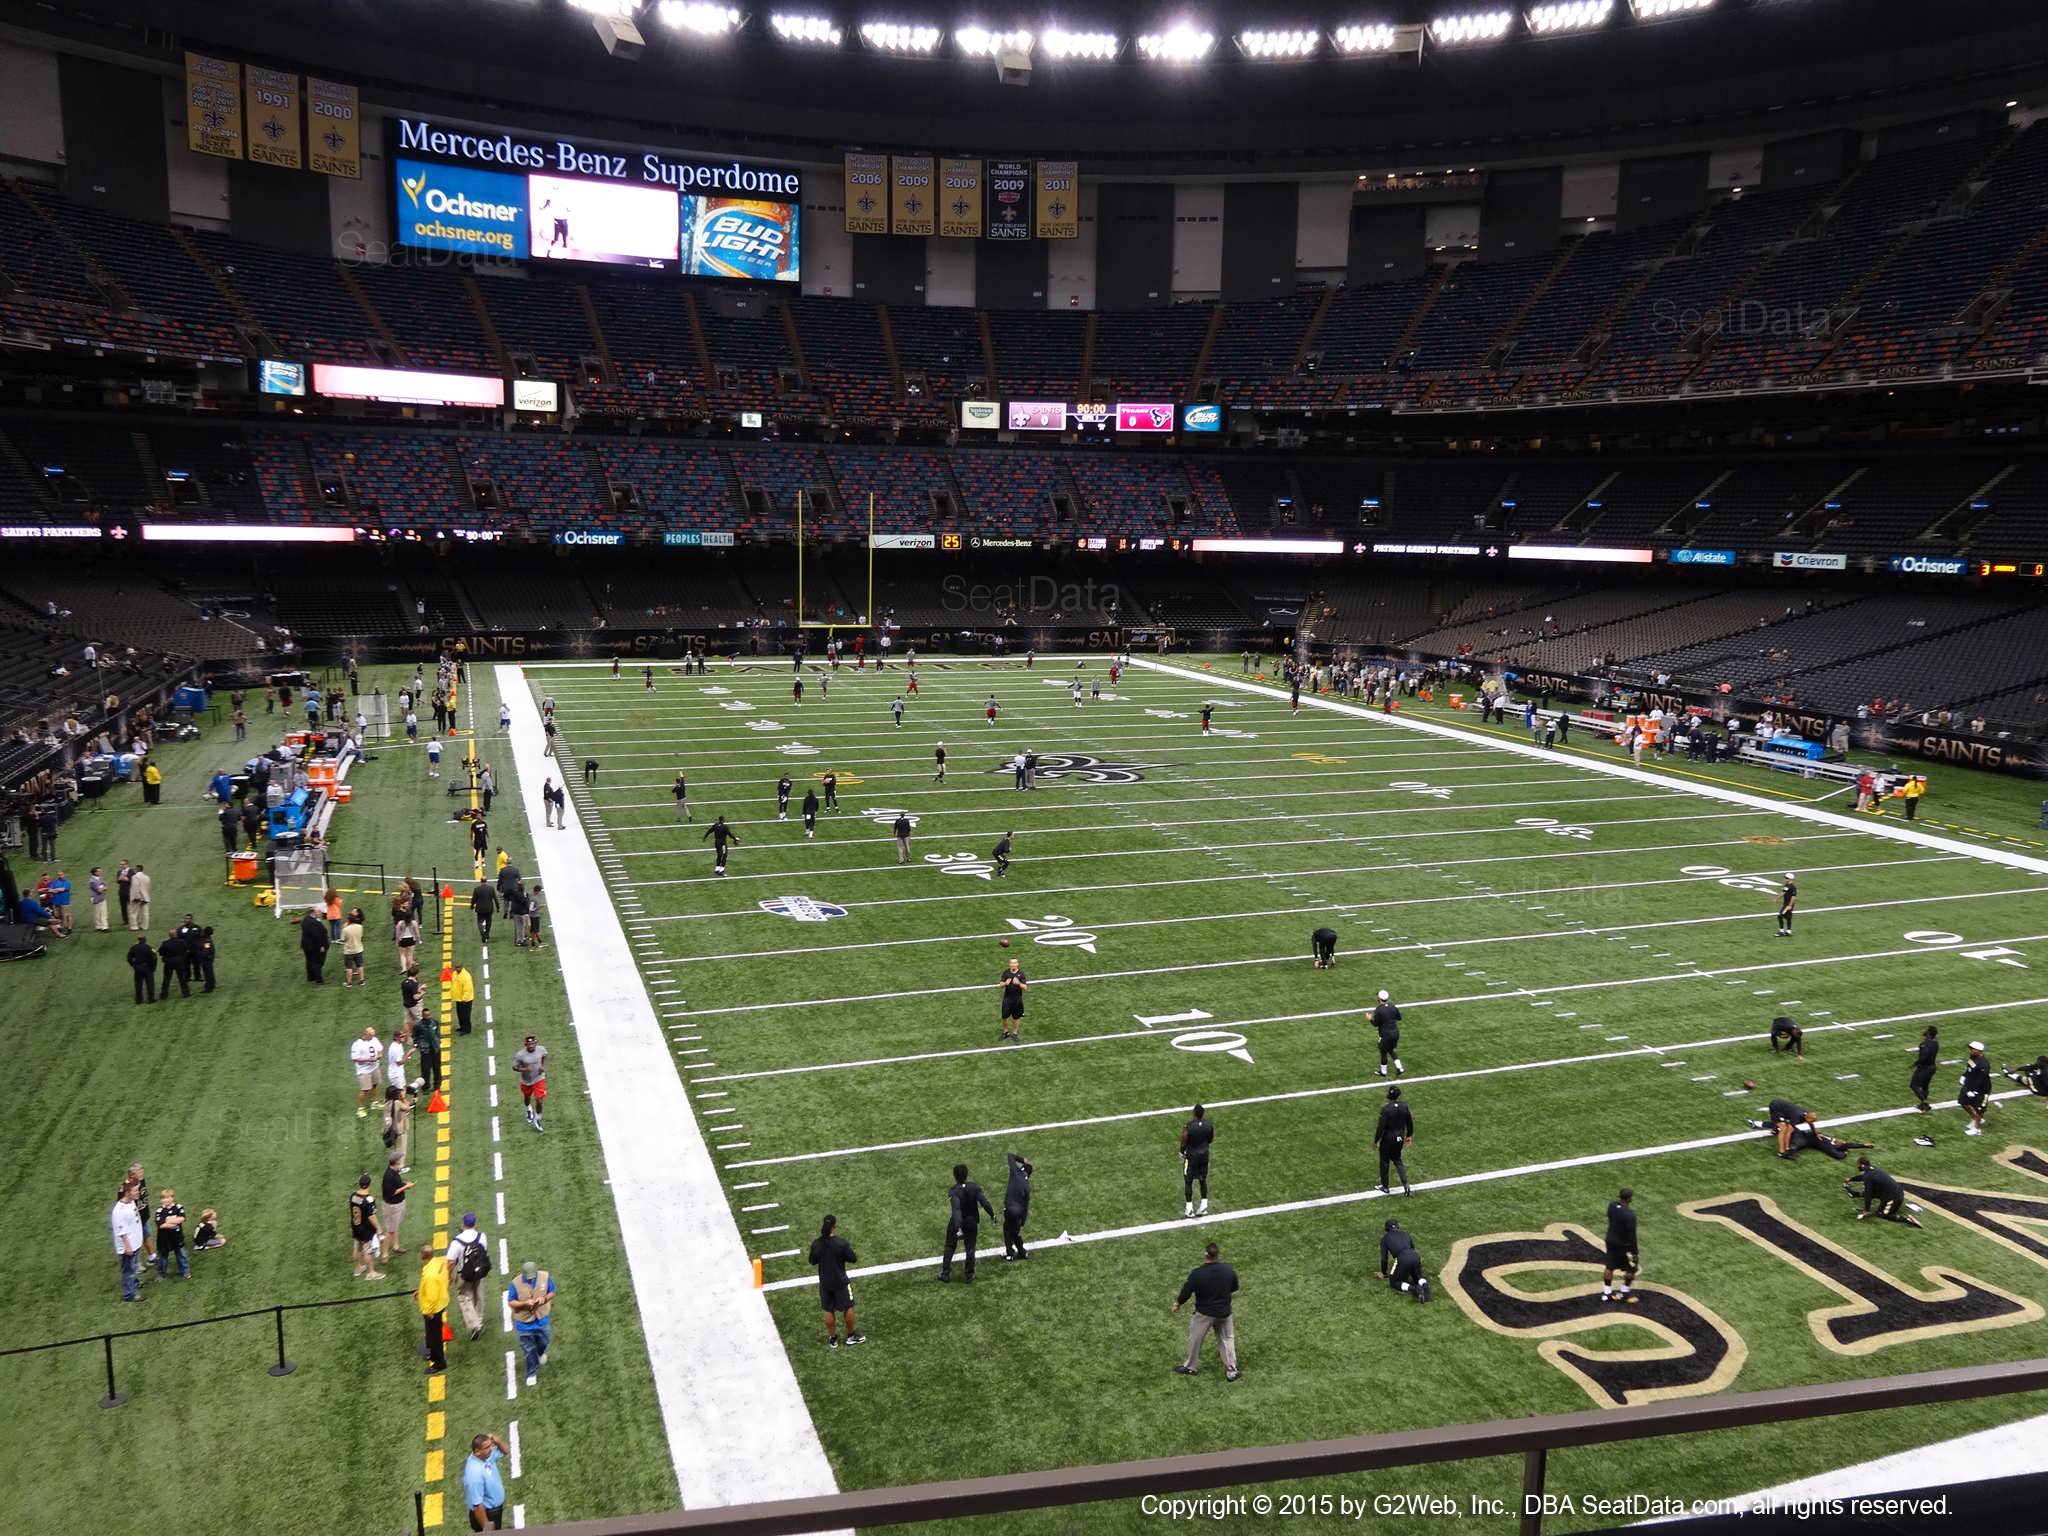 Seat view from section 247 at the Mercedes-Benz Superdome, home of the New Orleans Saints